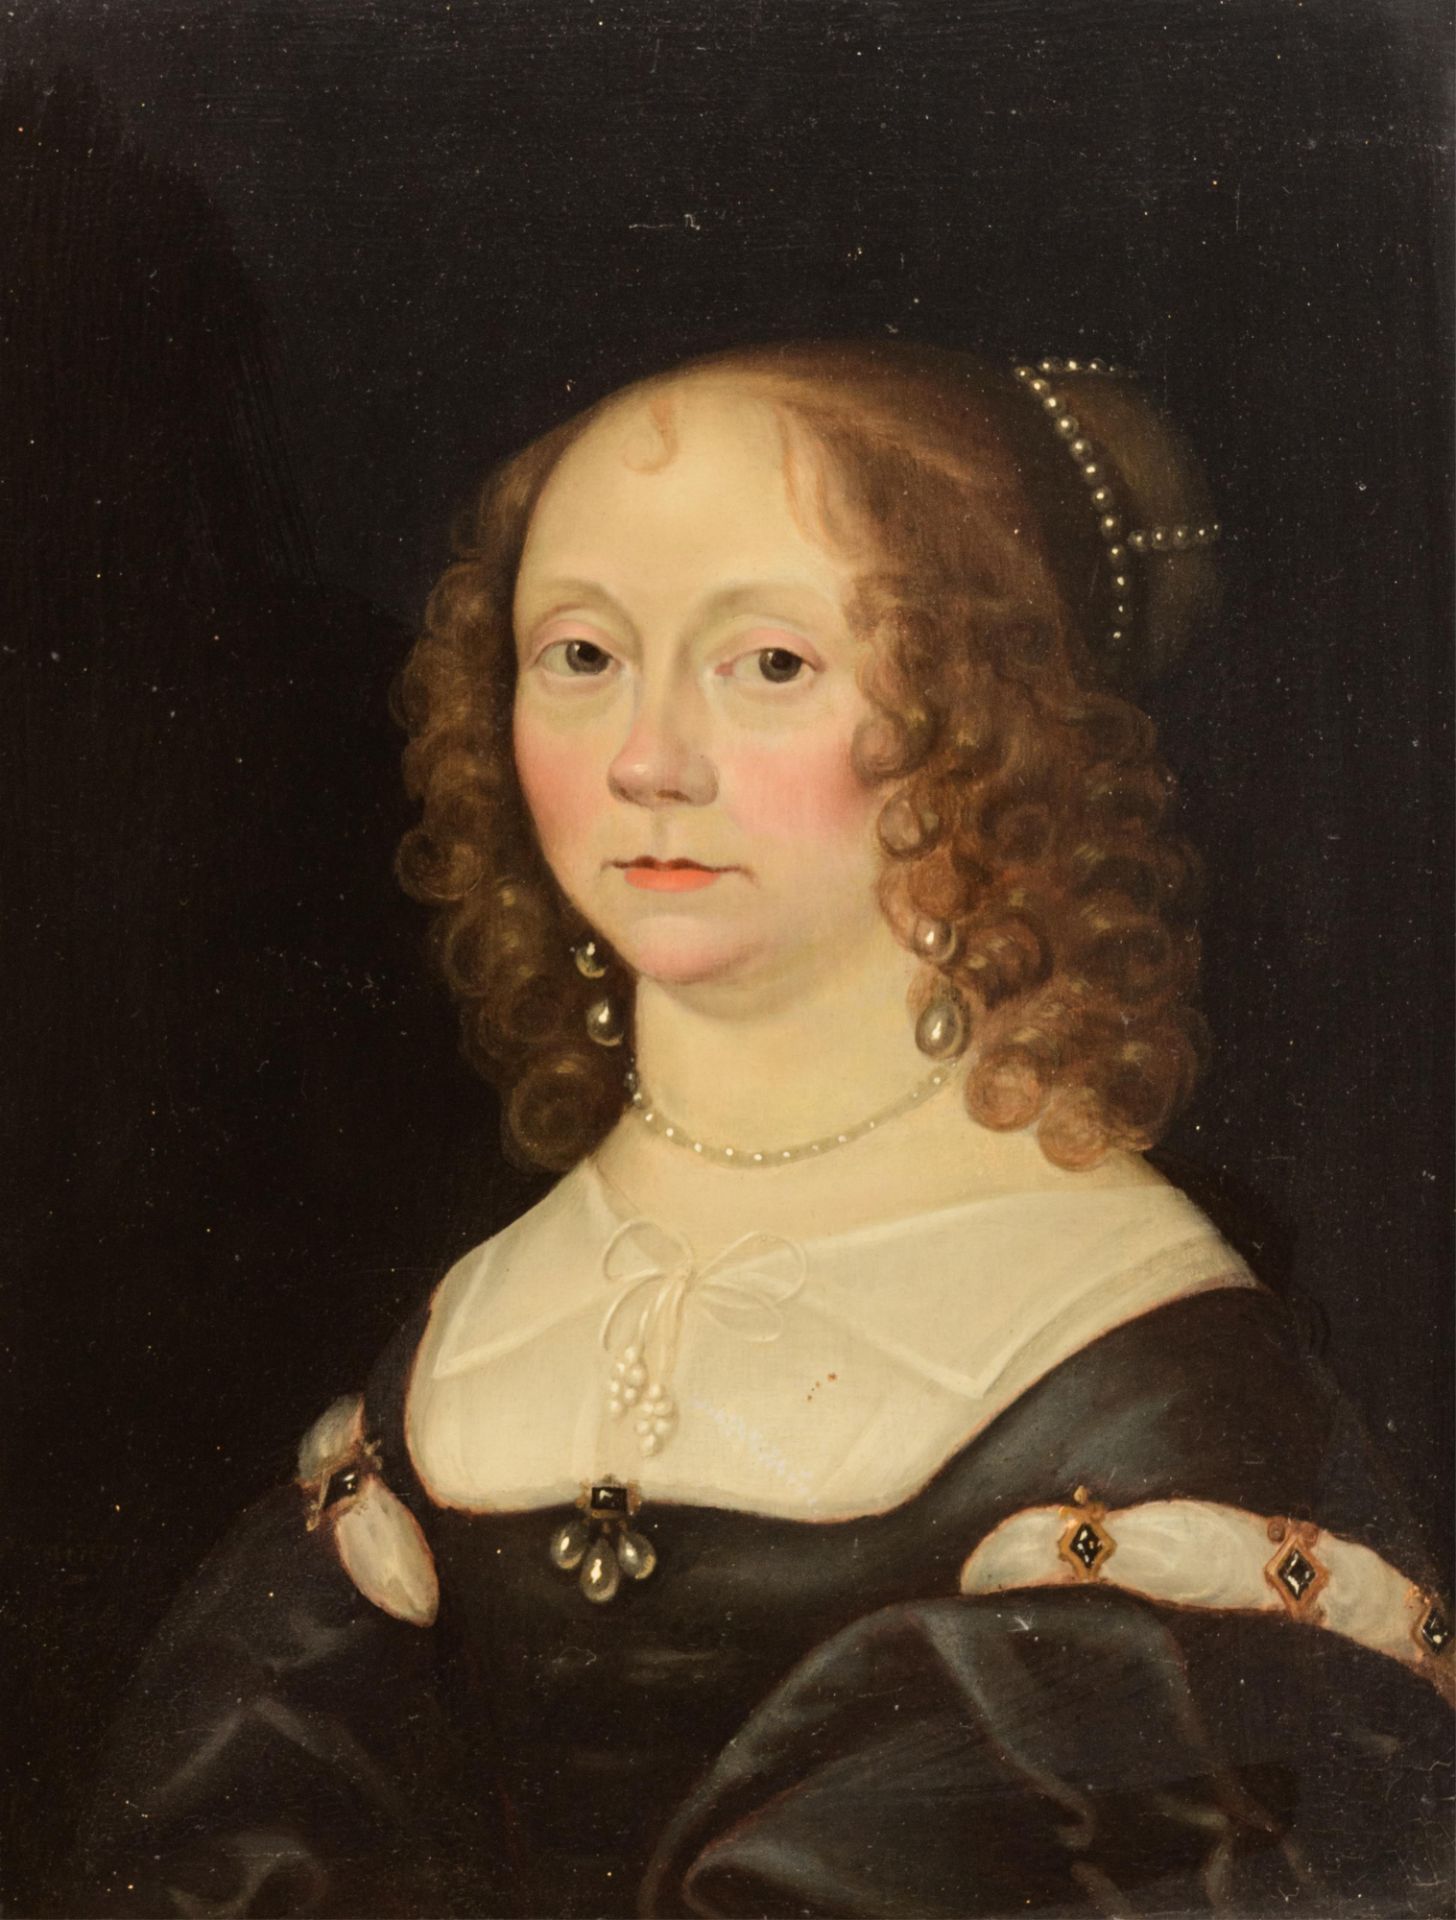 Downing, the portrait of a lady, 1643, 31 x 39 cm